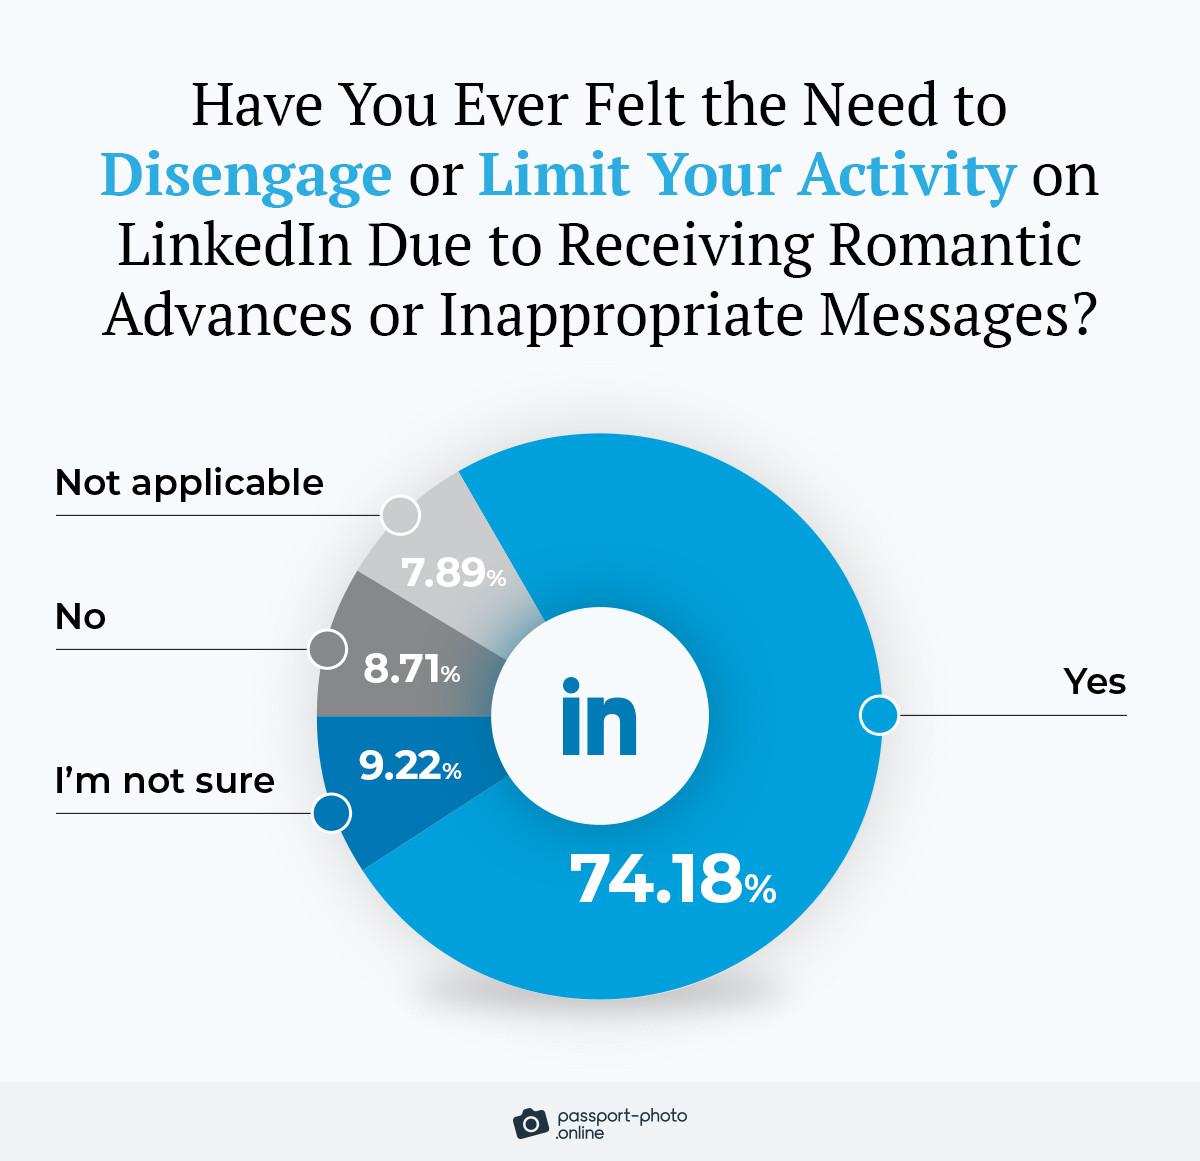 74% of female users felt the need to dial down their LinkedIn activity due to receiving romantic advances or inappropriate messages